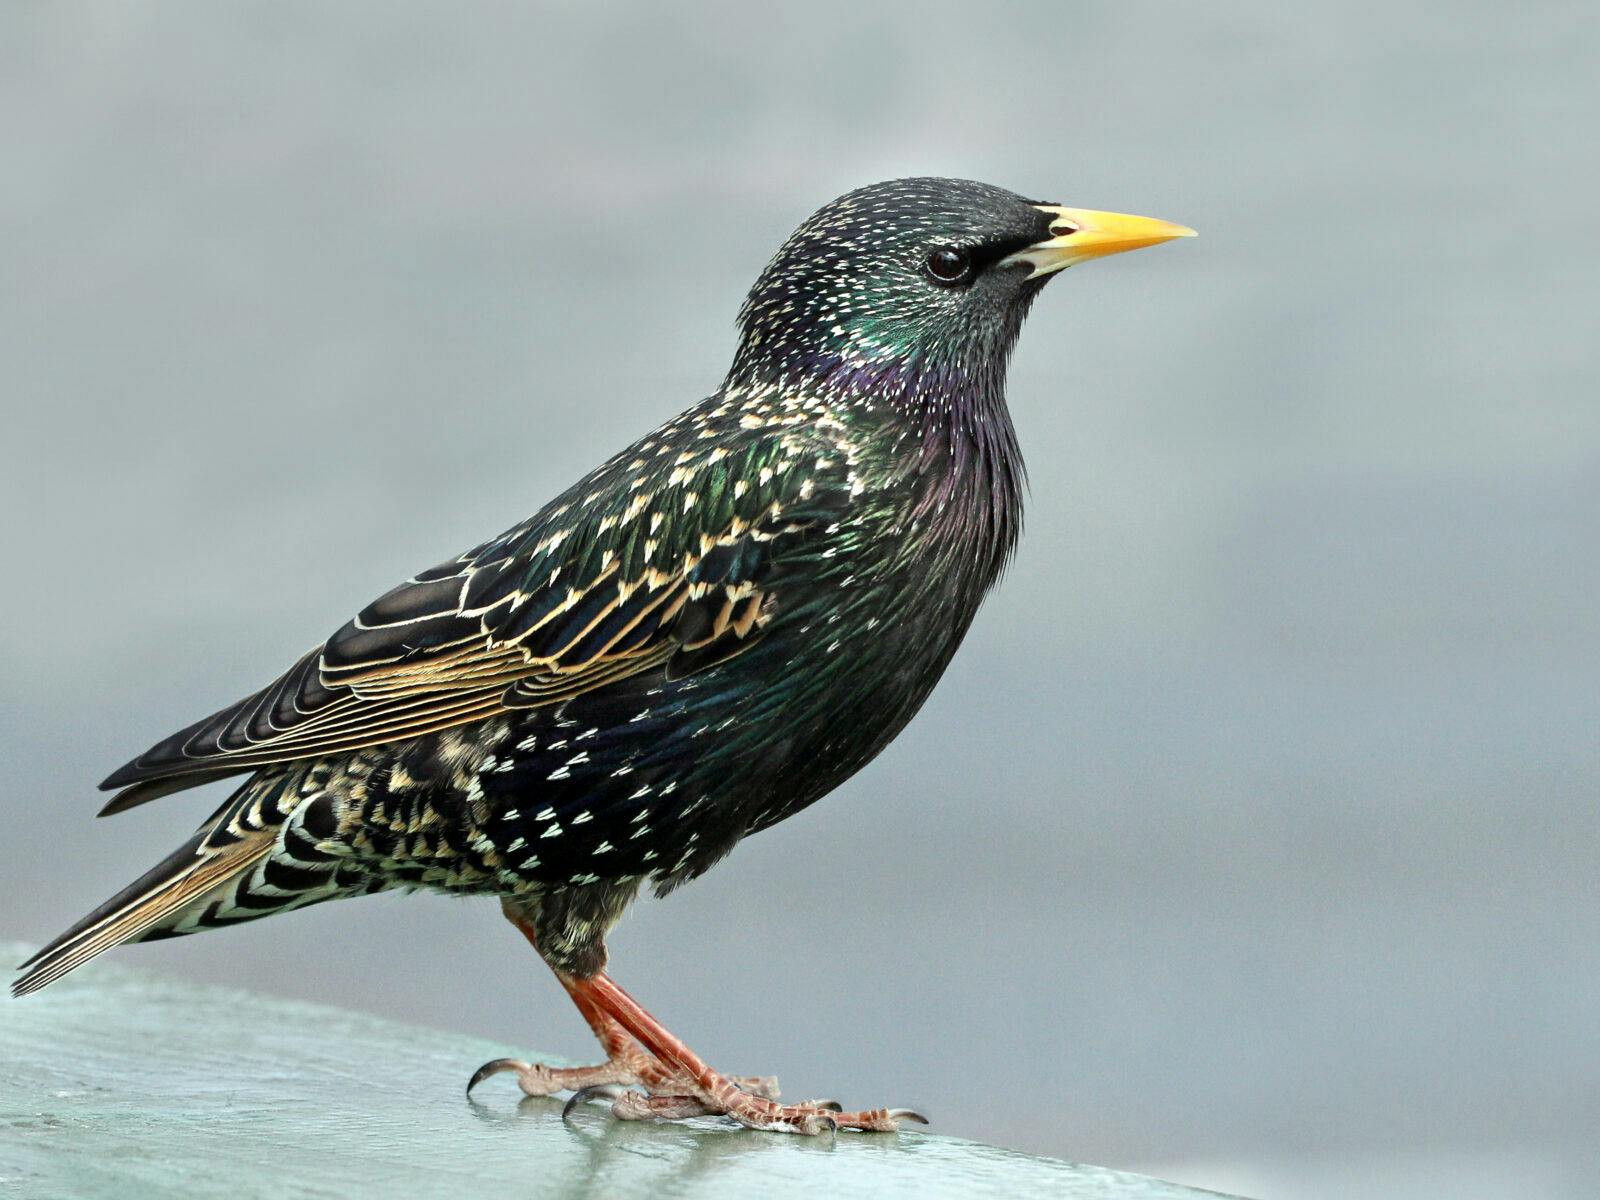 Close up side view of a Starling showing its colourful plumage.